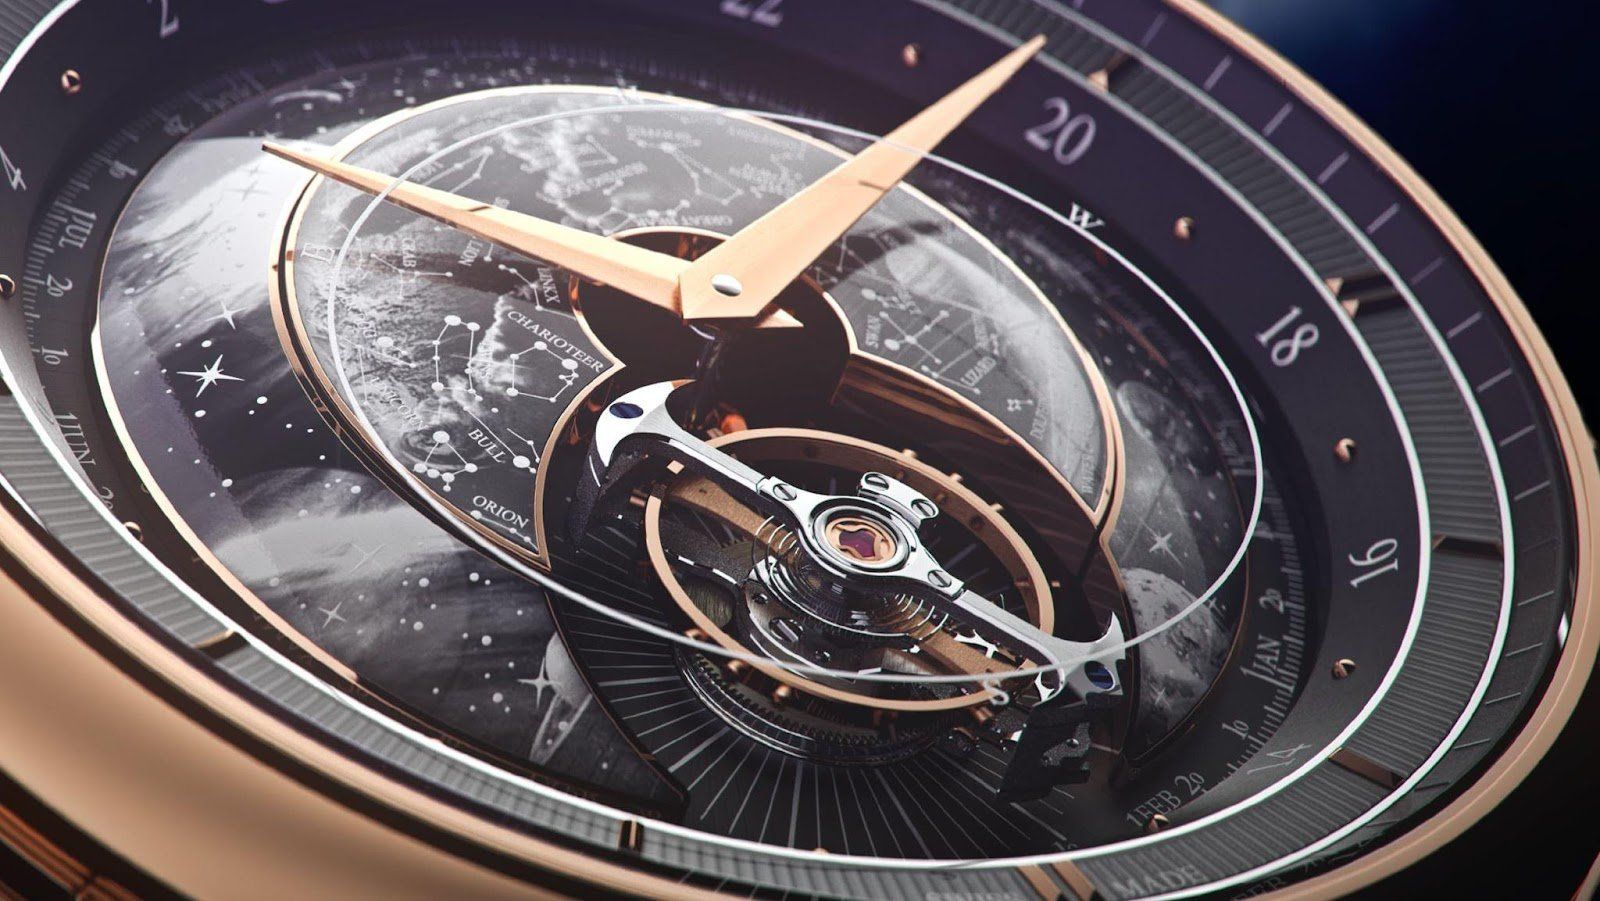 Celestial Complications You Can Witness At The Jaeger-LeCoultre Exhibit In Dubai